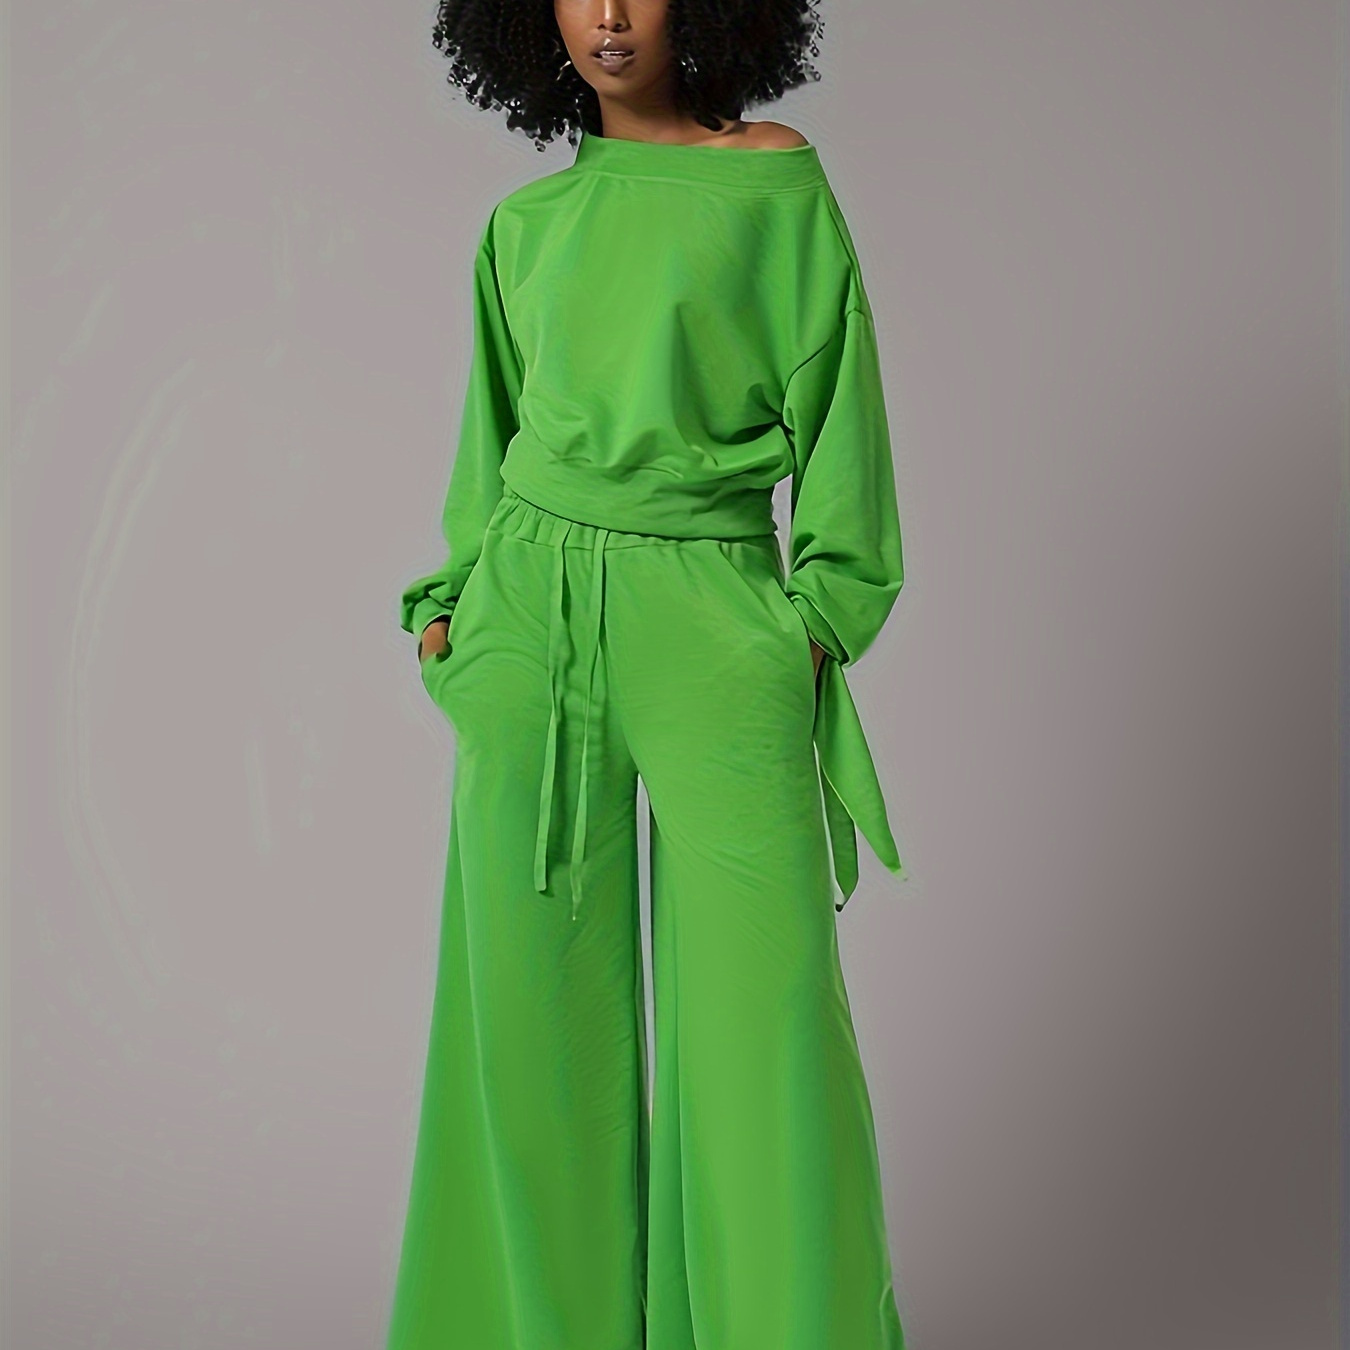 

Stylish Solid Color Pants Set, One-shoulder Long Sleeve Knot Top & Wide Leg Pants Outfits, Women's Clothing